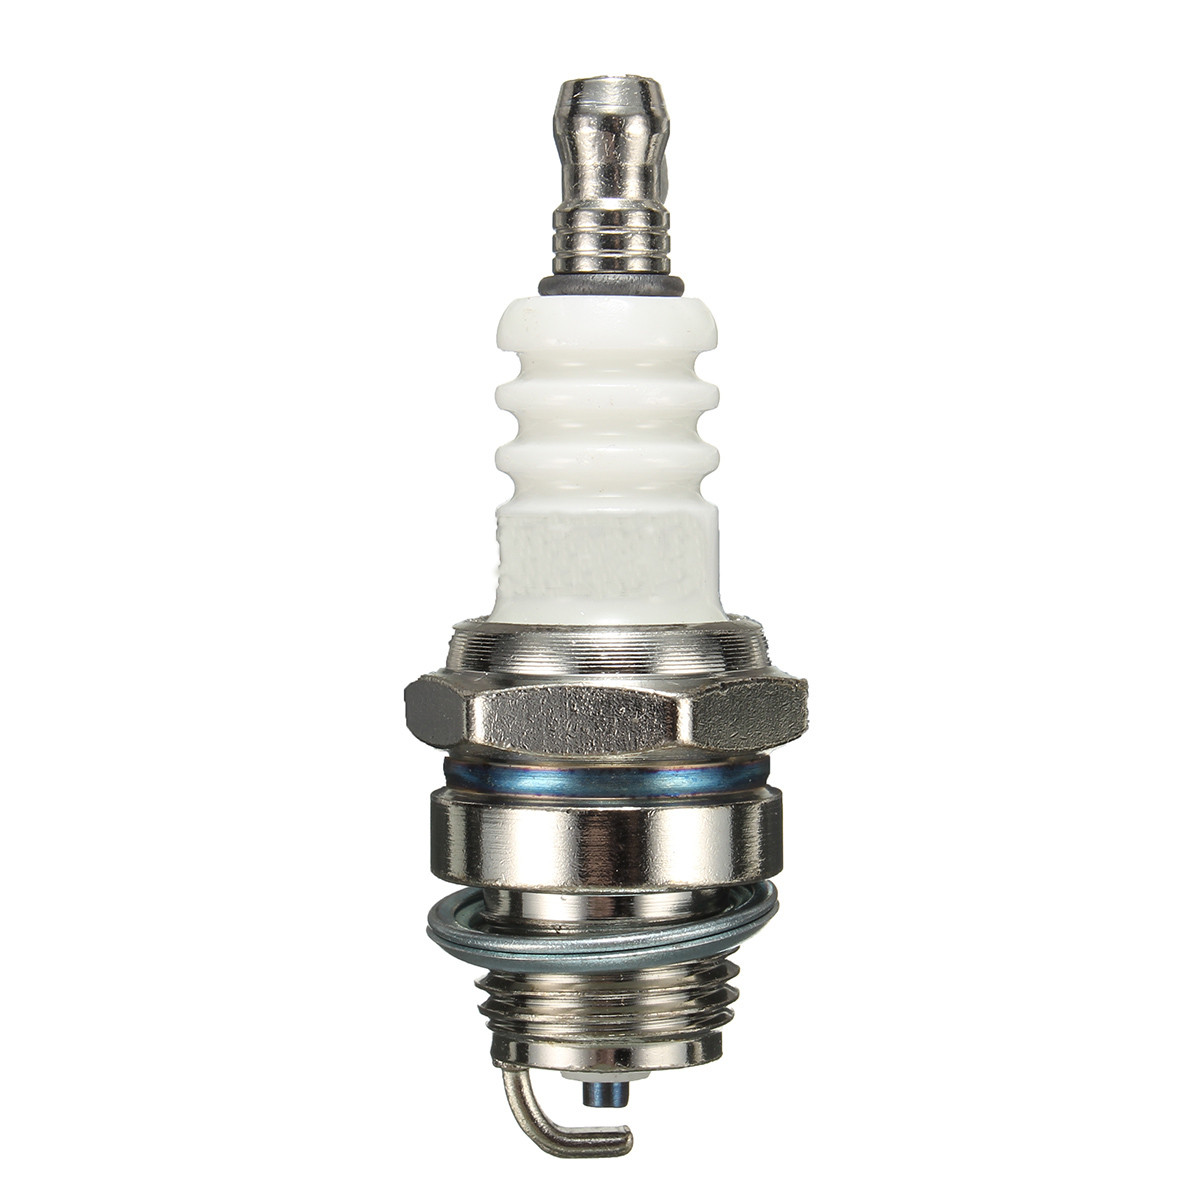 RJ19LM-BR2LM-Lawnmower-Spark-Plug-for-Briggs-and-Stratton-Engines-Motors-1339644-8